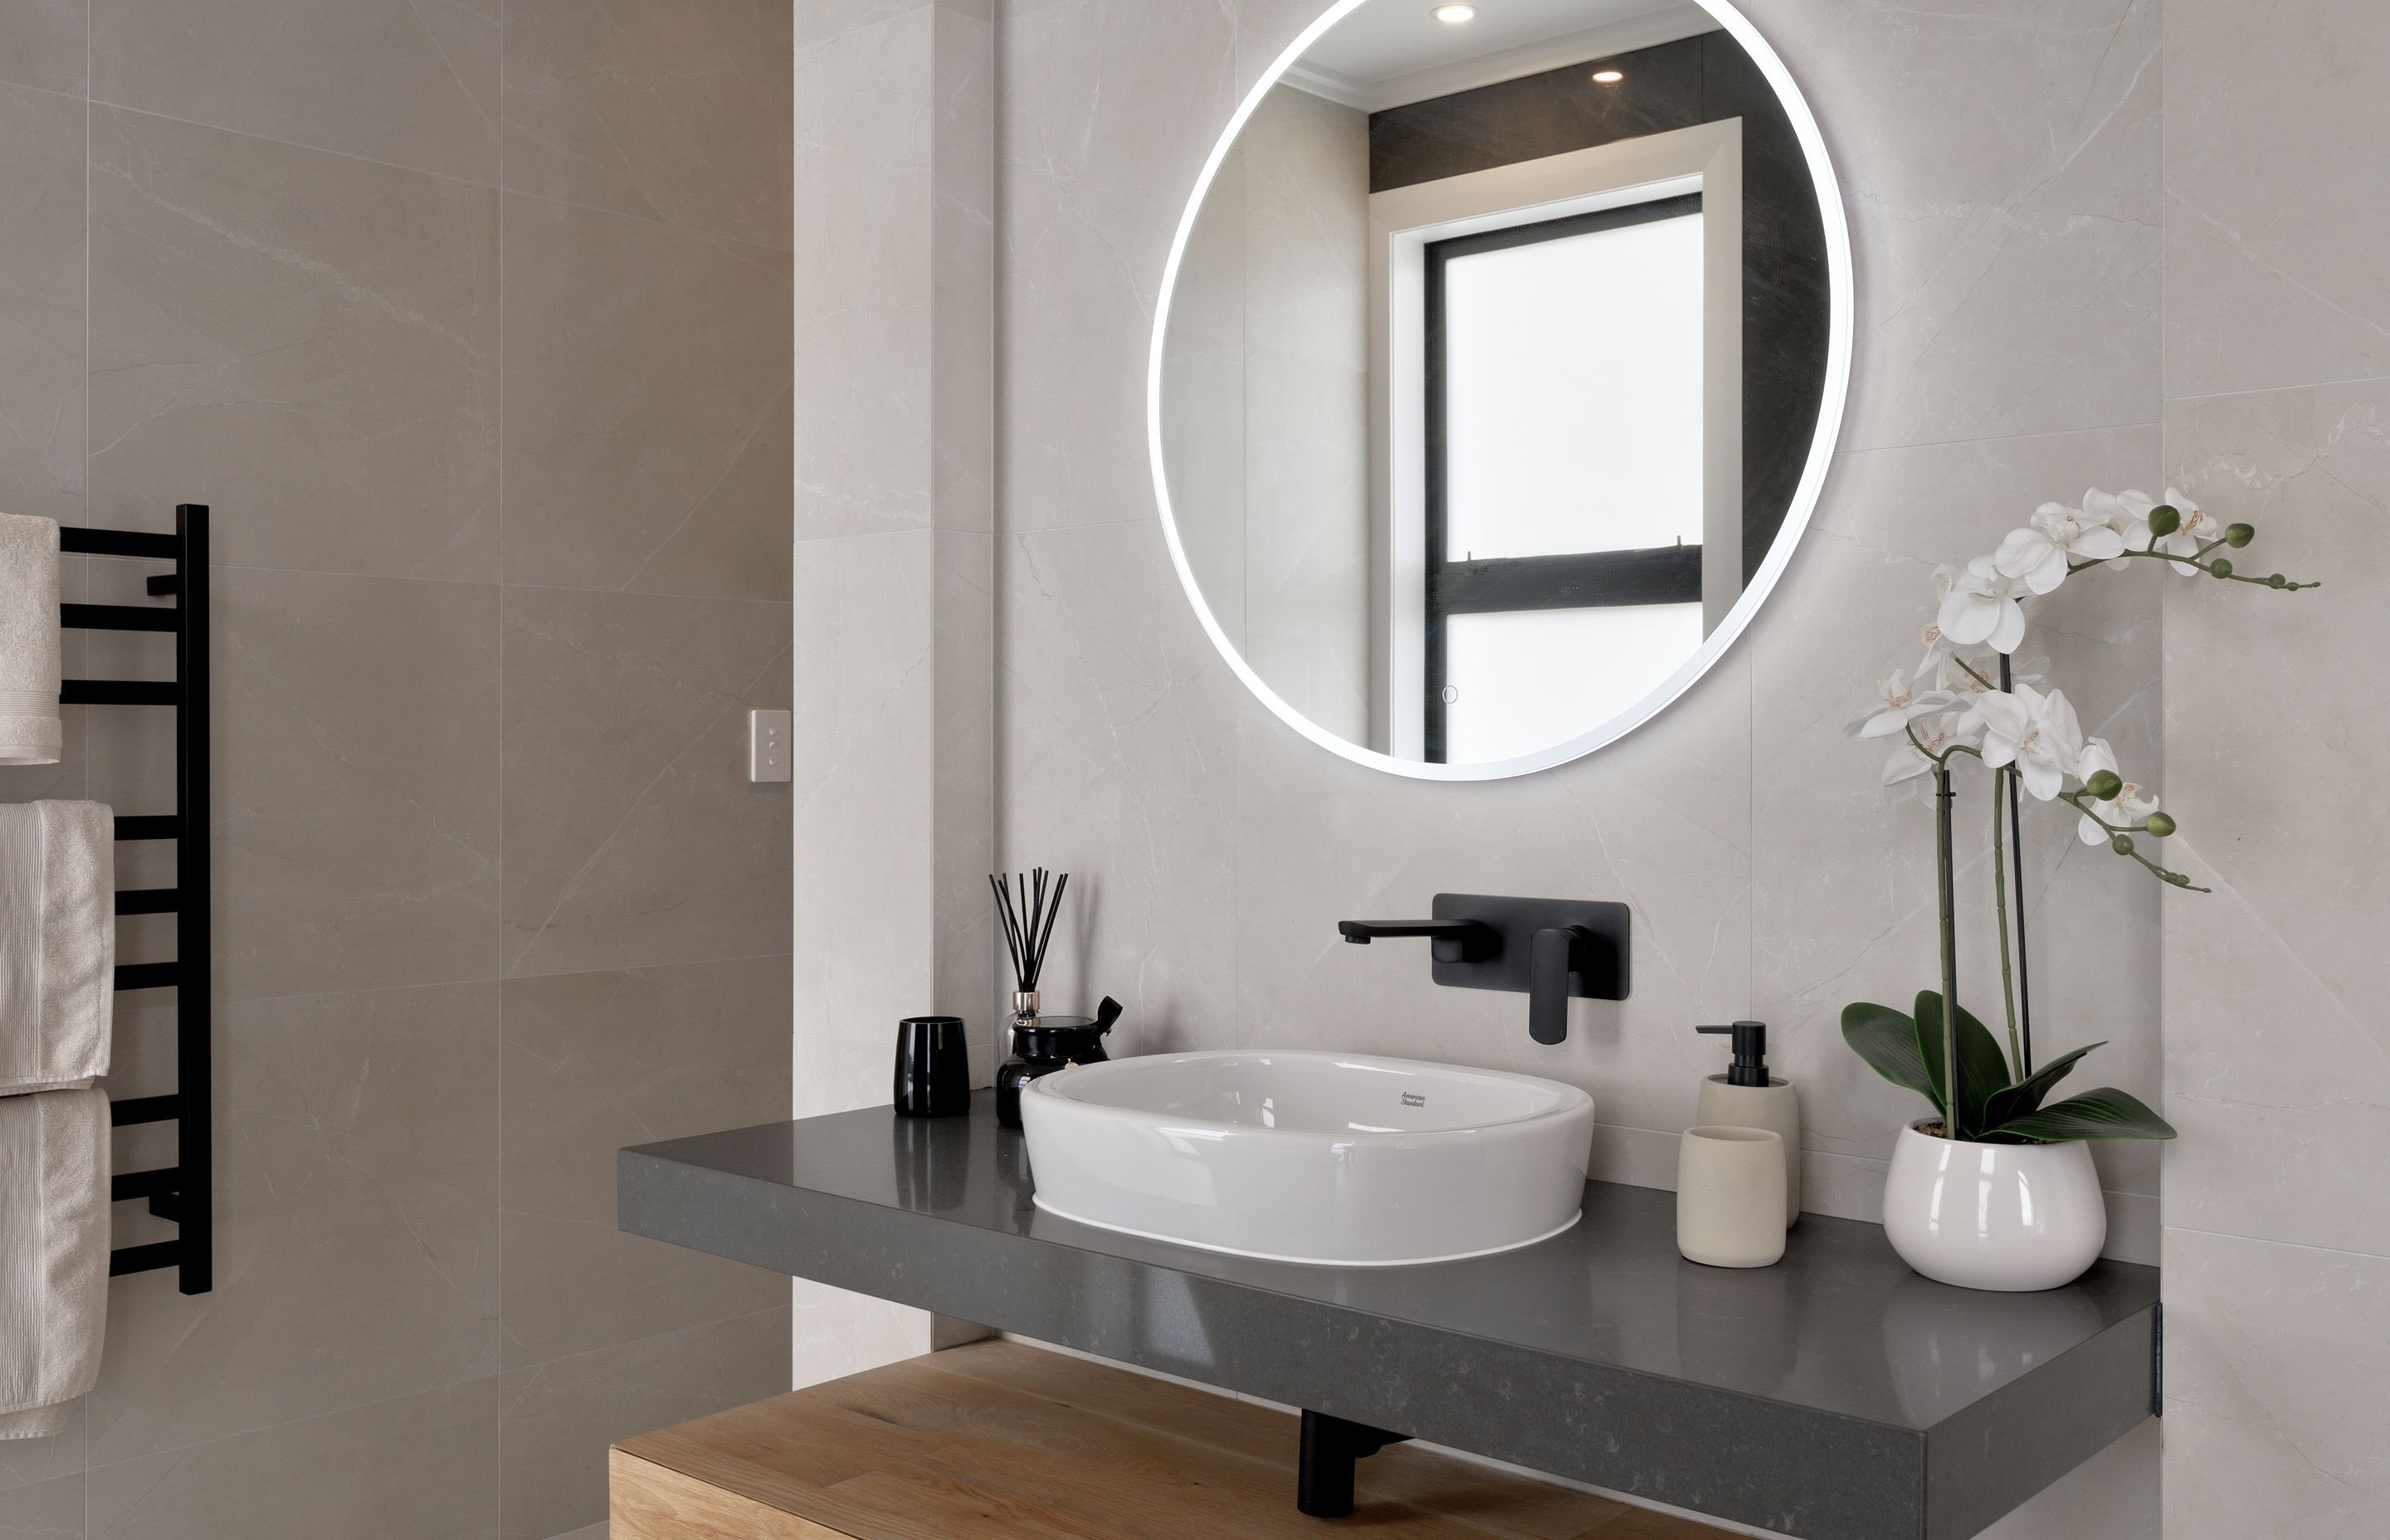 Each bathroom has a mix of stone, tiles, timber and black accents.